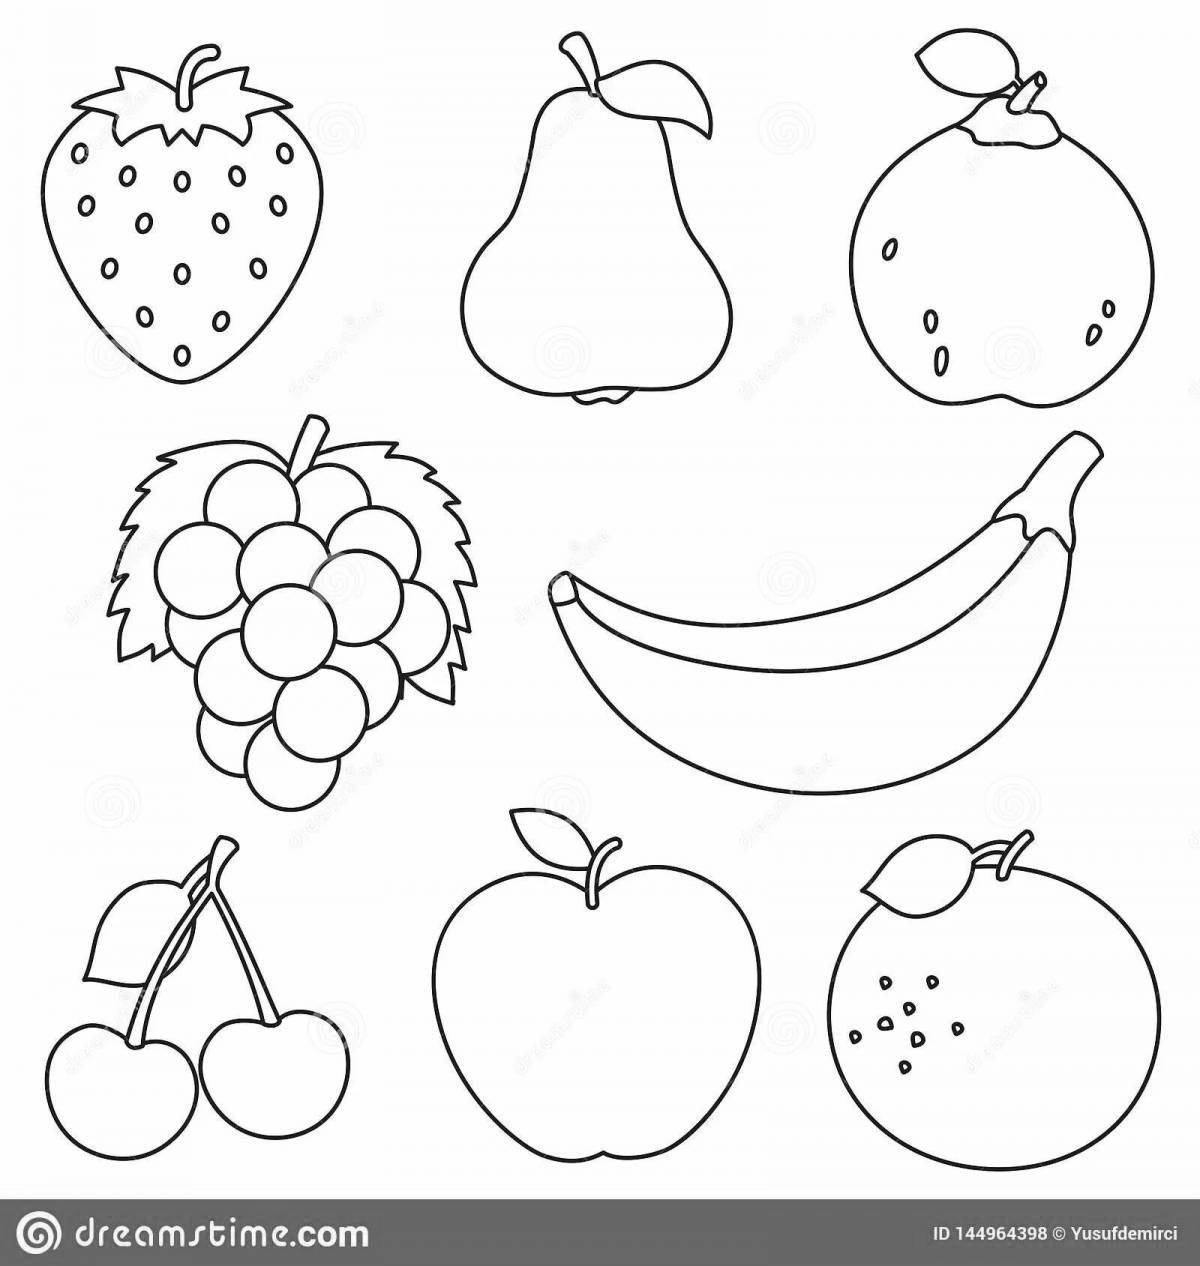 Playful fruit coloring page for 6-7 year olds